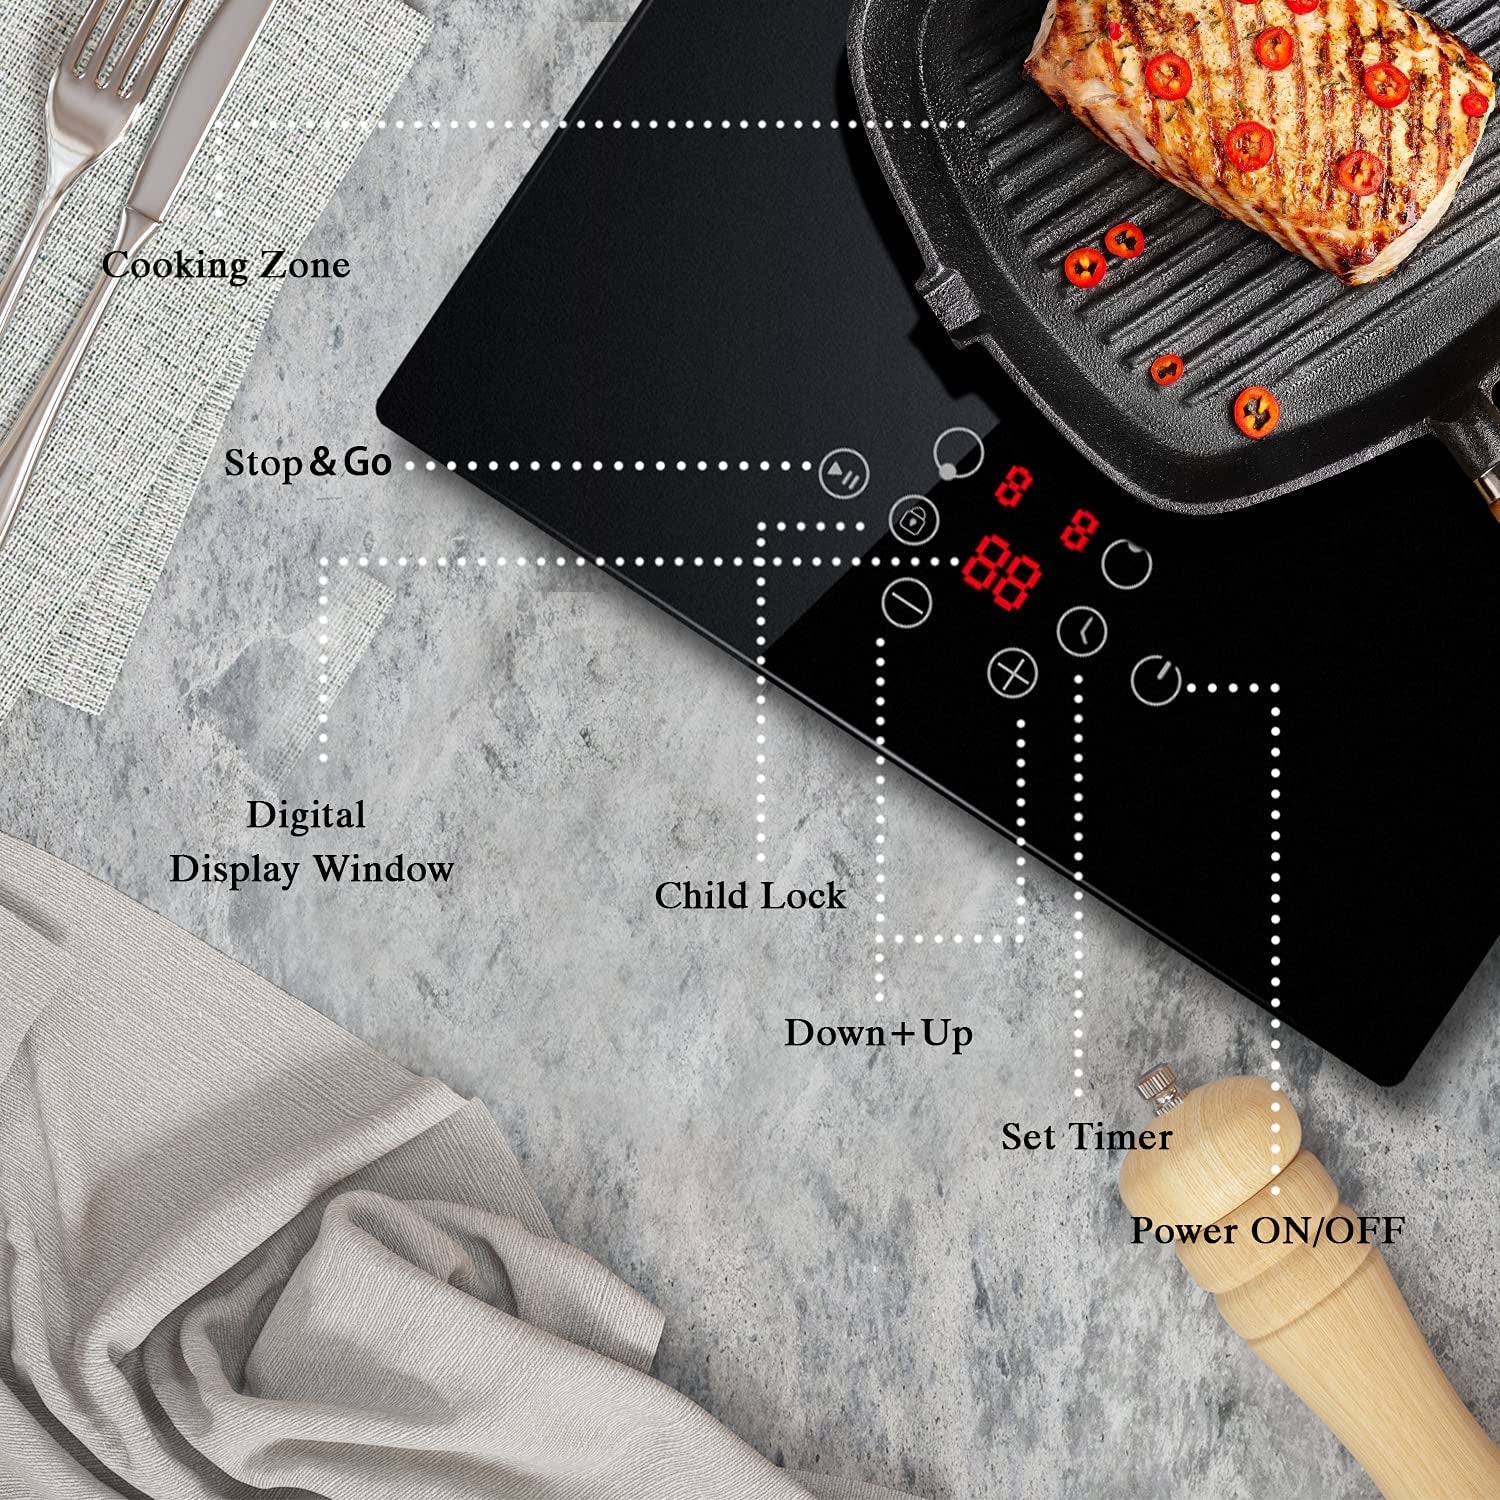 12 Inch 2 Burner Electric Cooktop with Sensor Touch Control, 3000W Power, 9 Power Levels, Child Safety Lock, and Timer